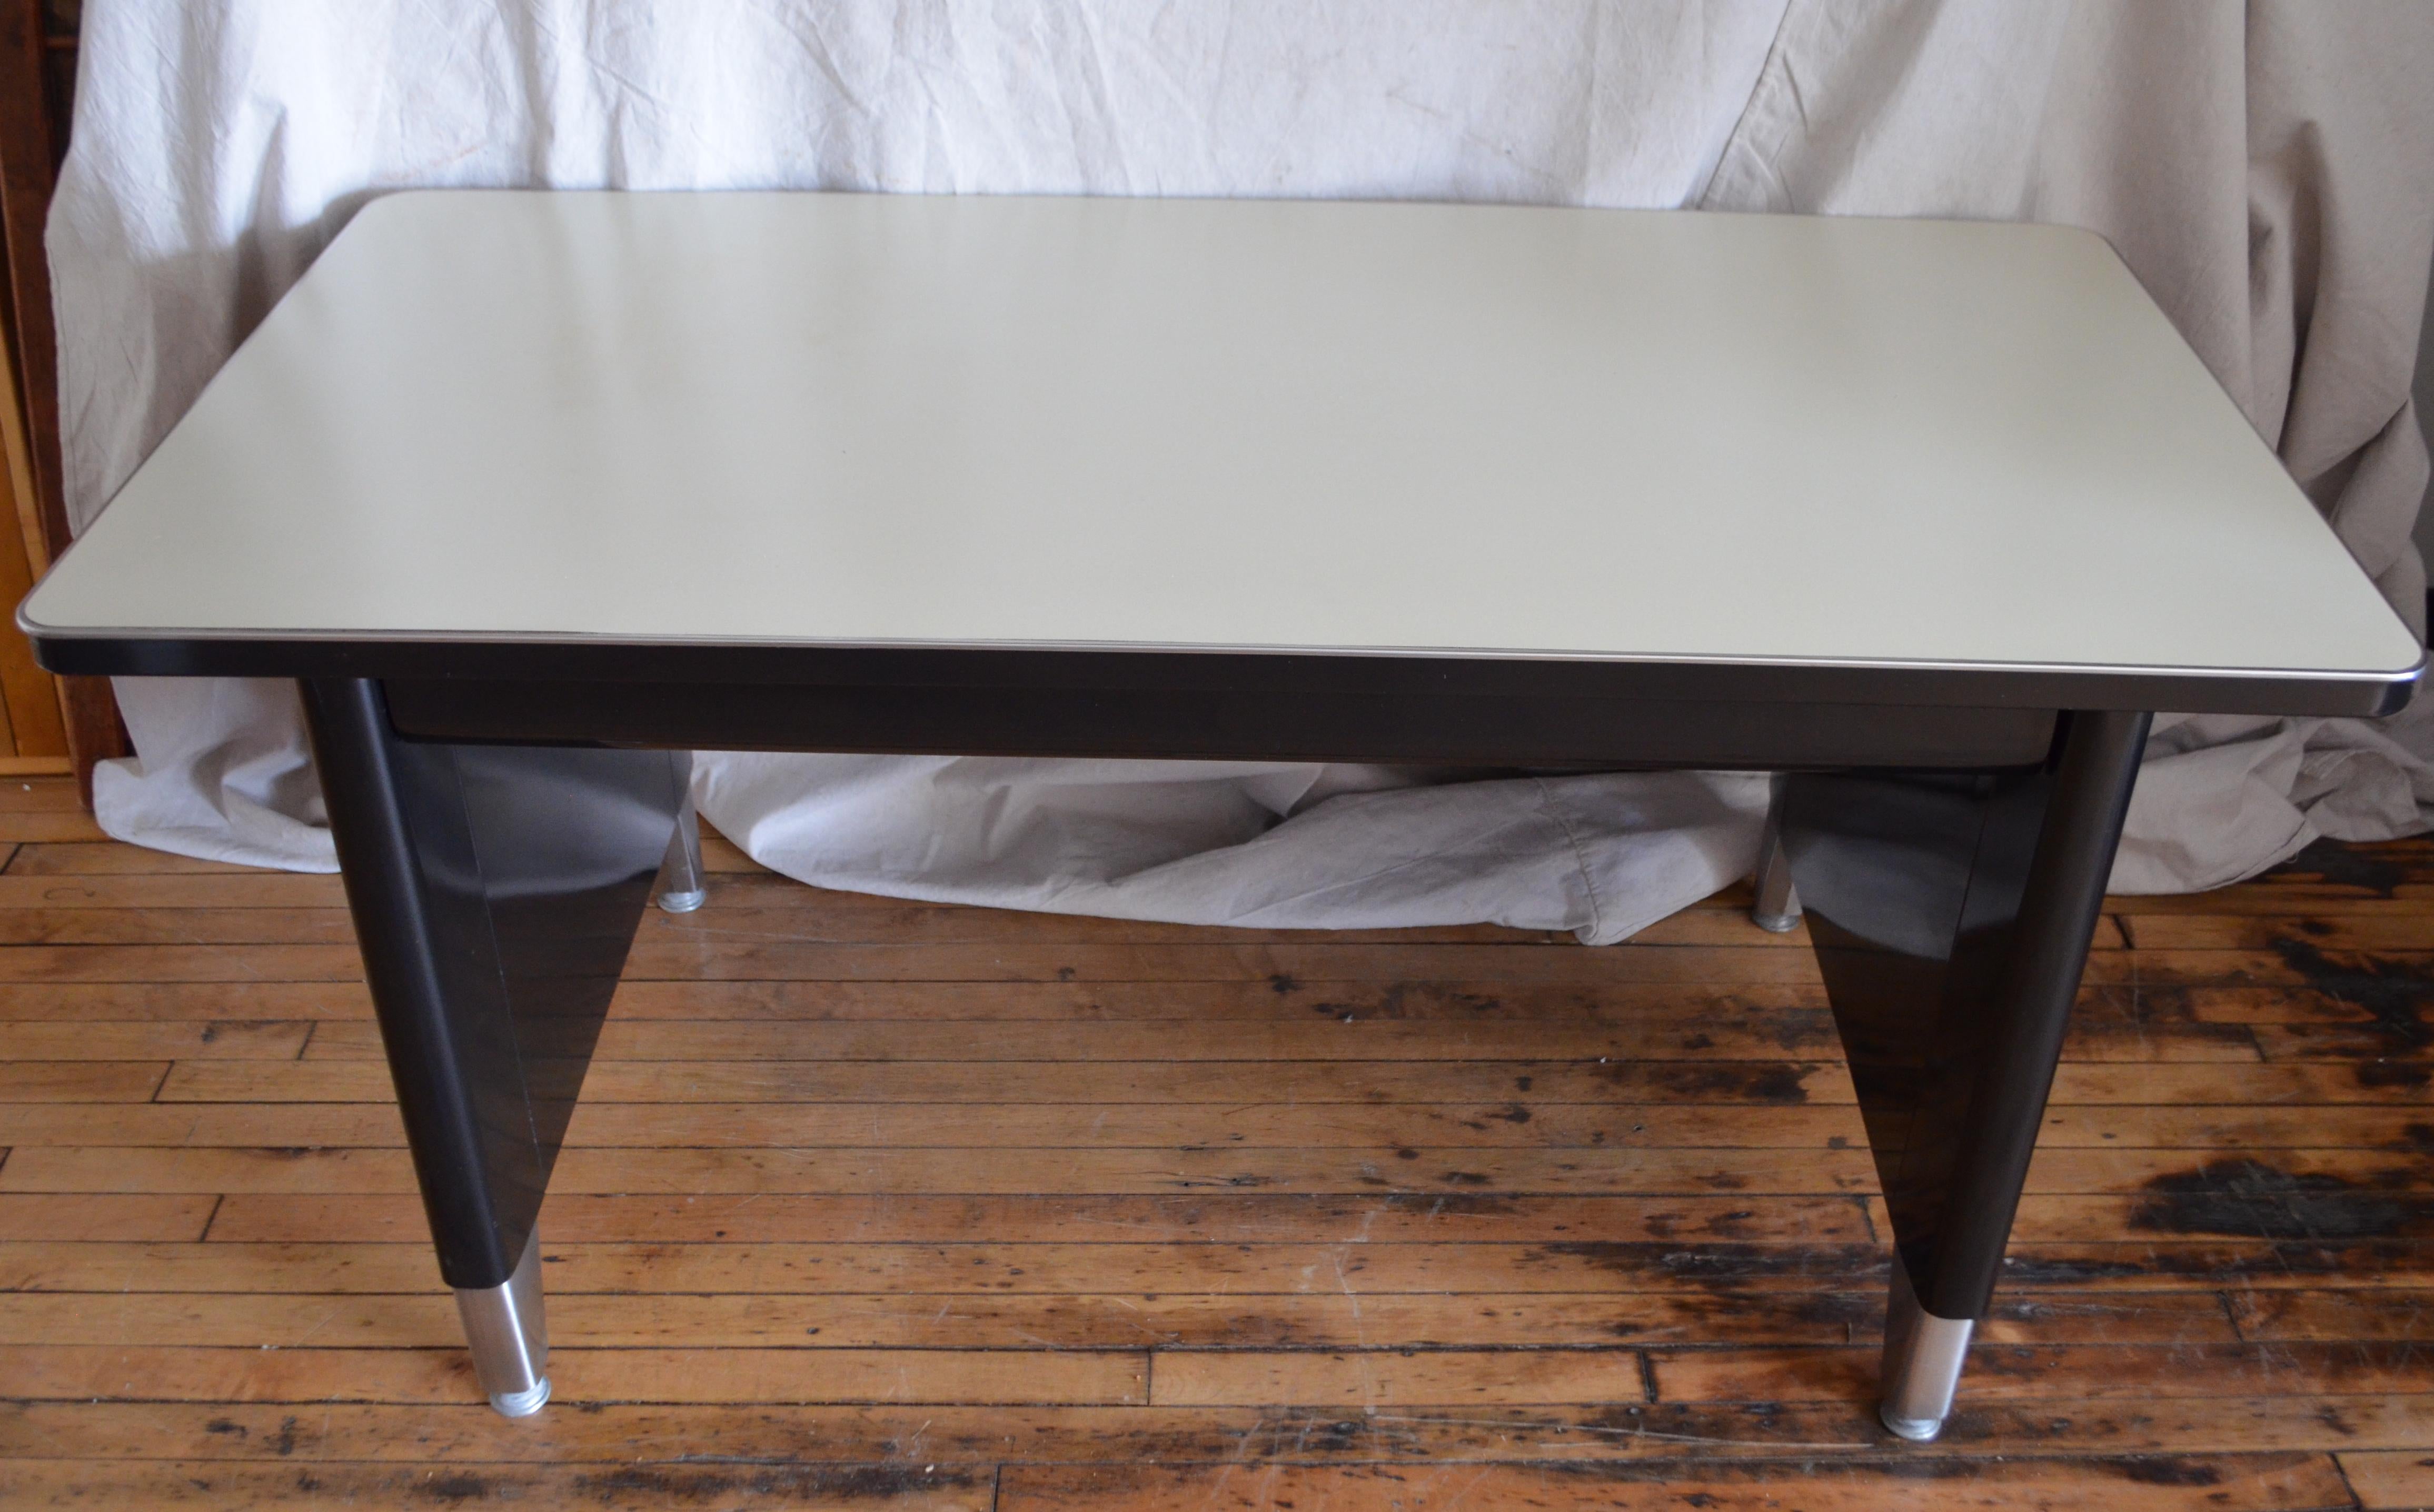 Industrial steel desk. Invincible brand. Painted black steel frame, creamy off-white laminate top and chrome feet. In extraordinary condition. A midcentury icon. The Boomers grew up with them. They were a fundamental fixture in every office. This